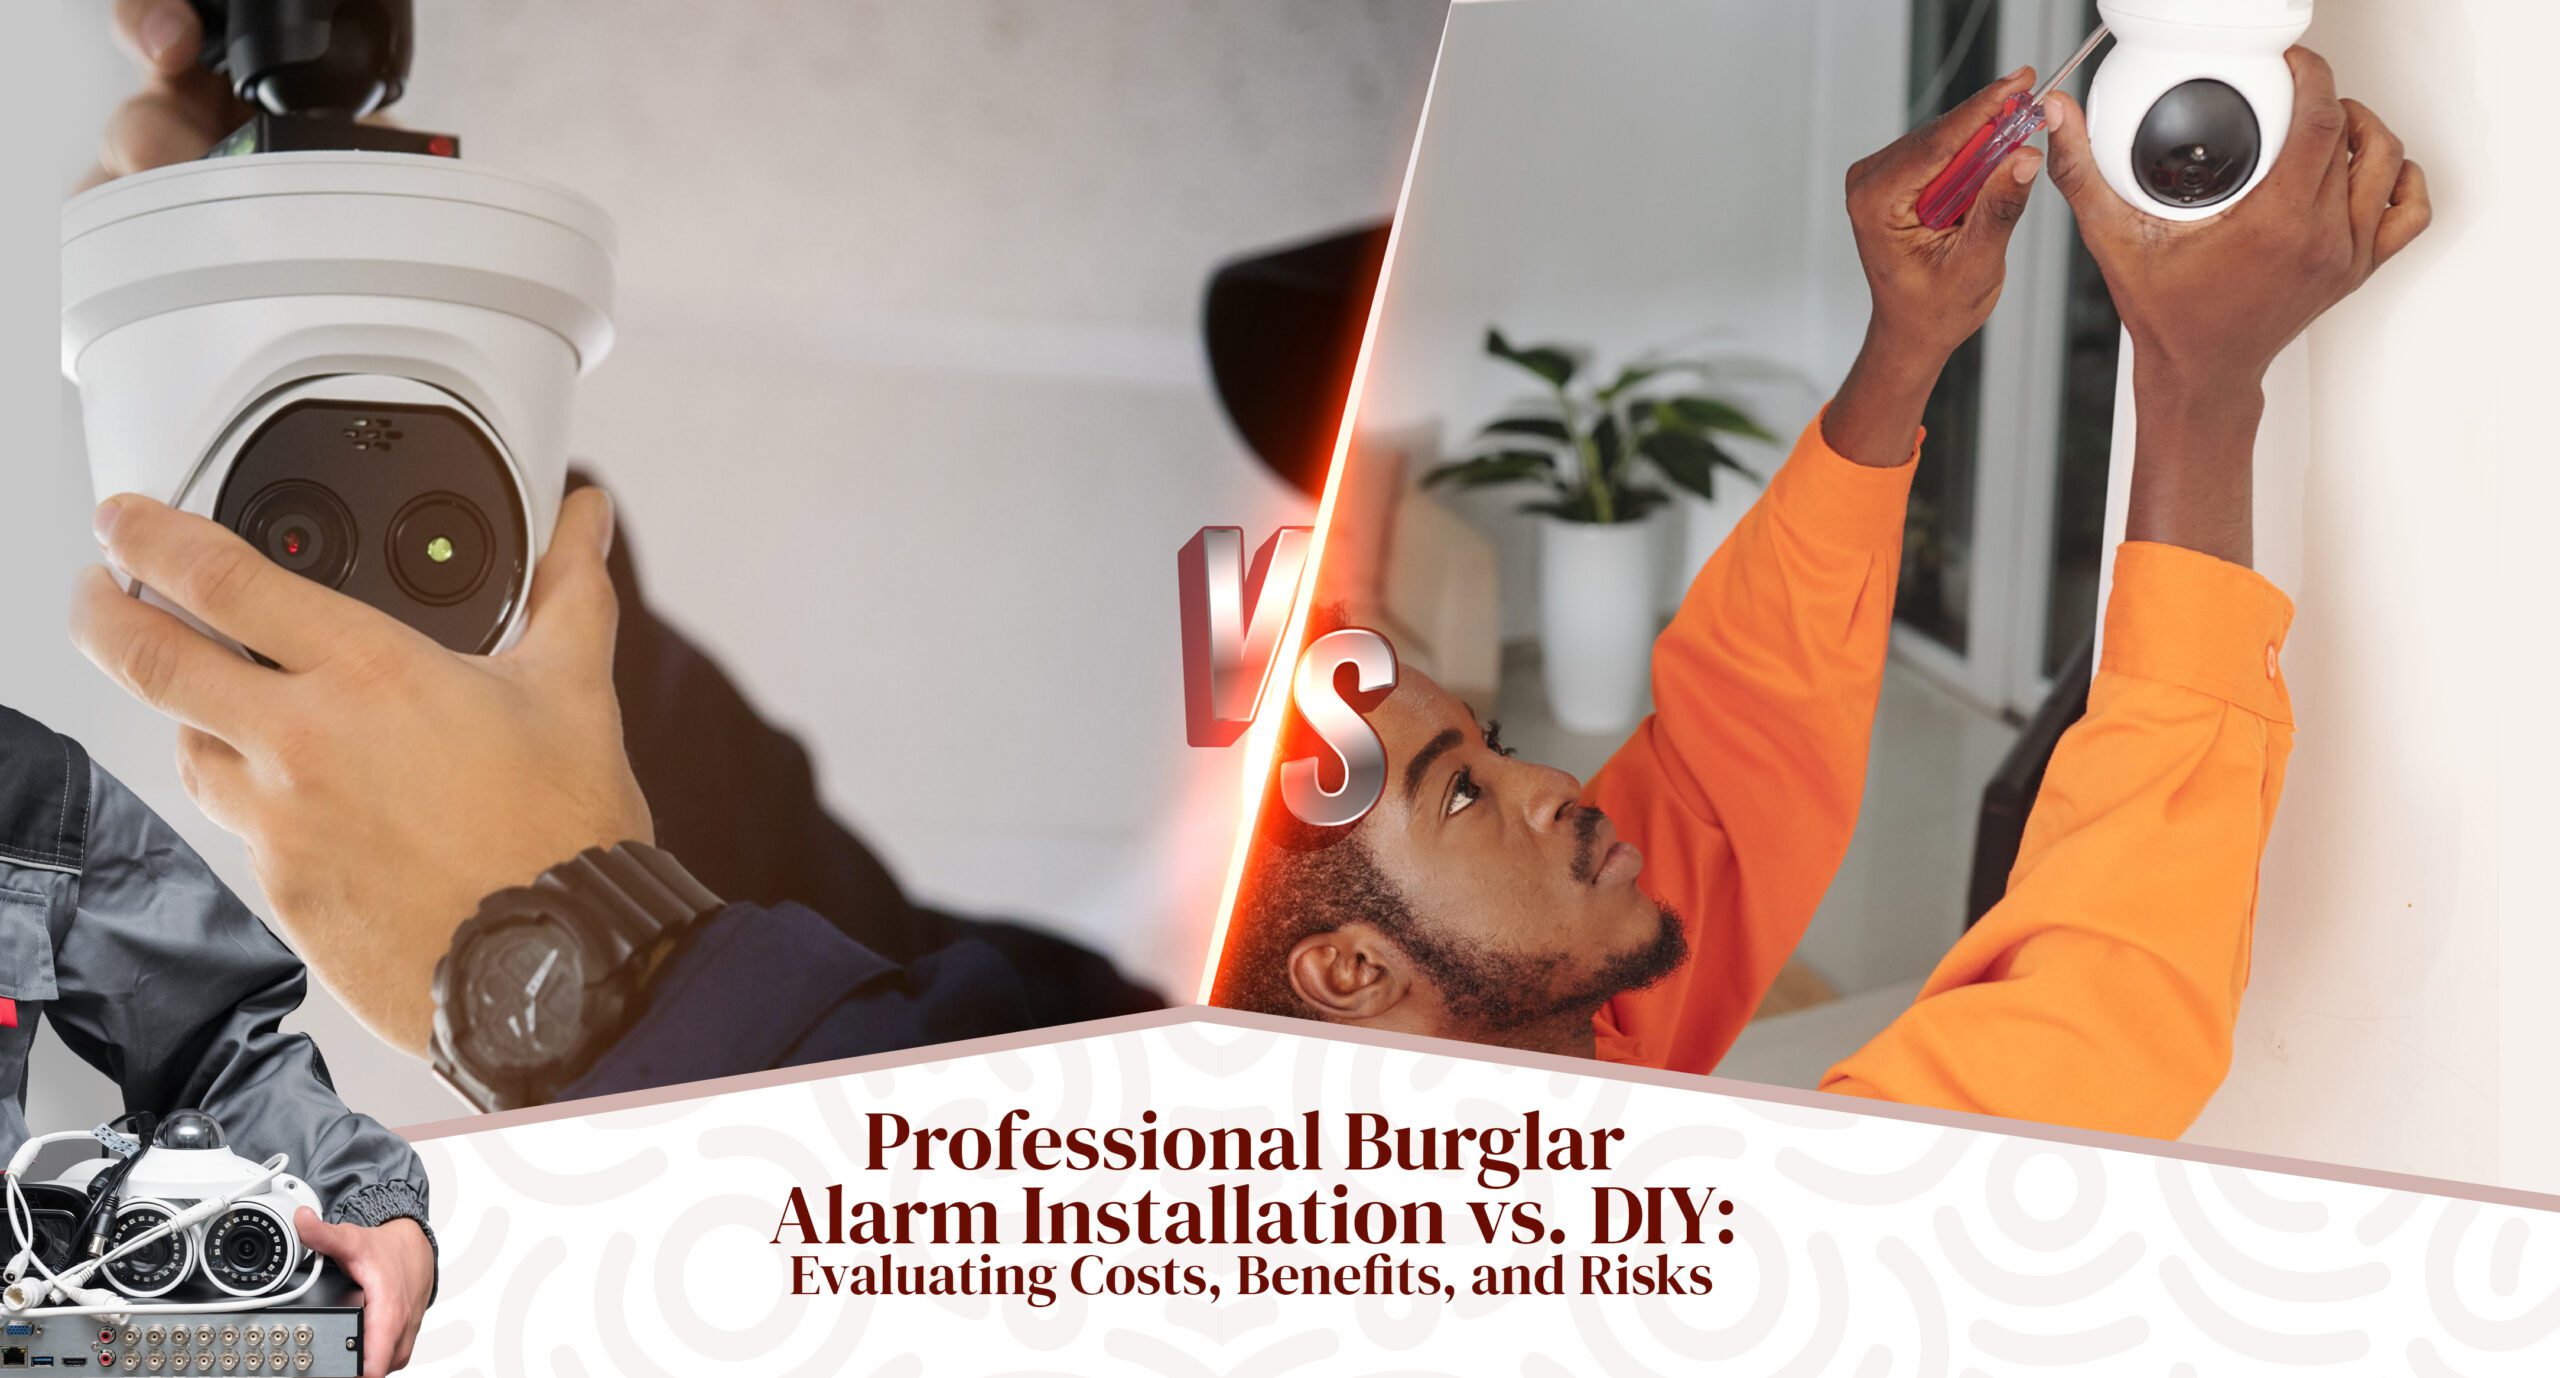 Featured image for “Professional Burglar Alarm Installation vs. DIY: Evaluating Costs, Benefits, and Risks”